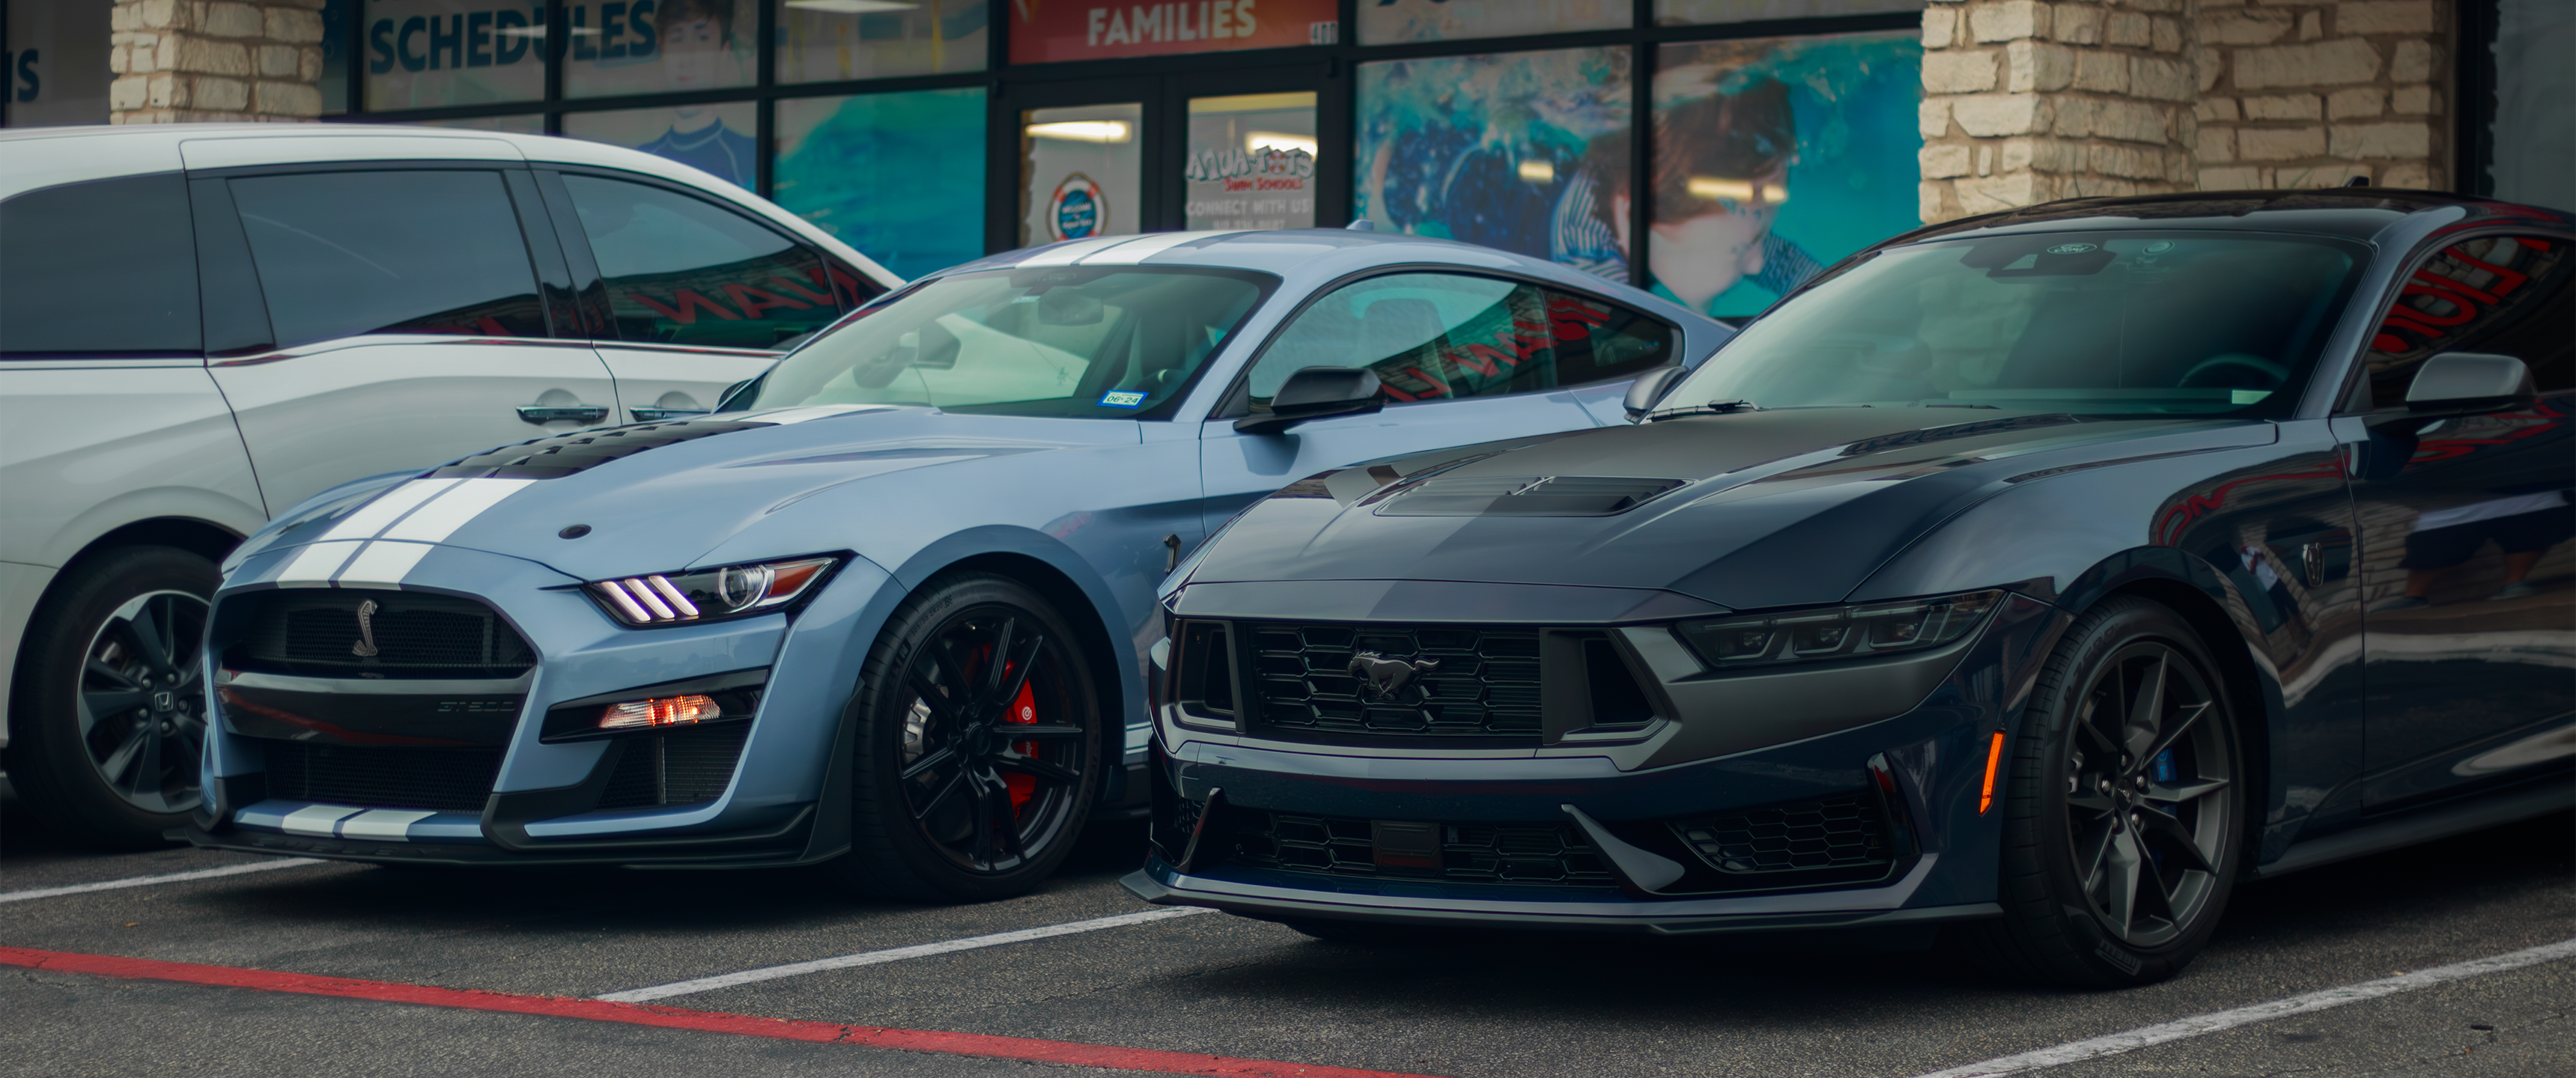 Car Ford Mustang Ford Mustang Shelby Mustang Dark Horse 3440x1440